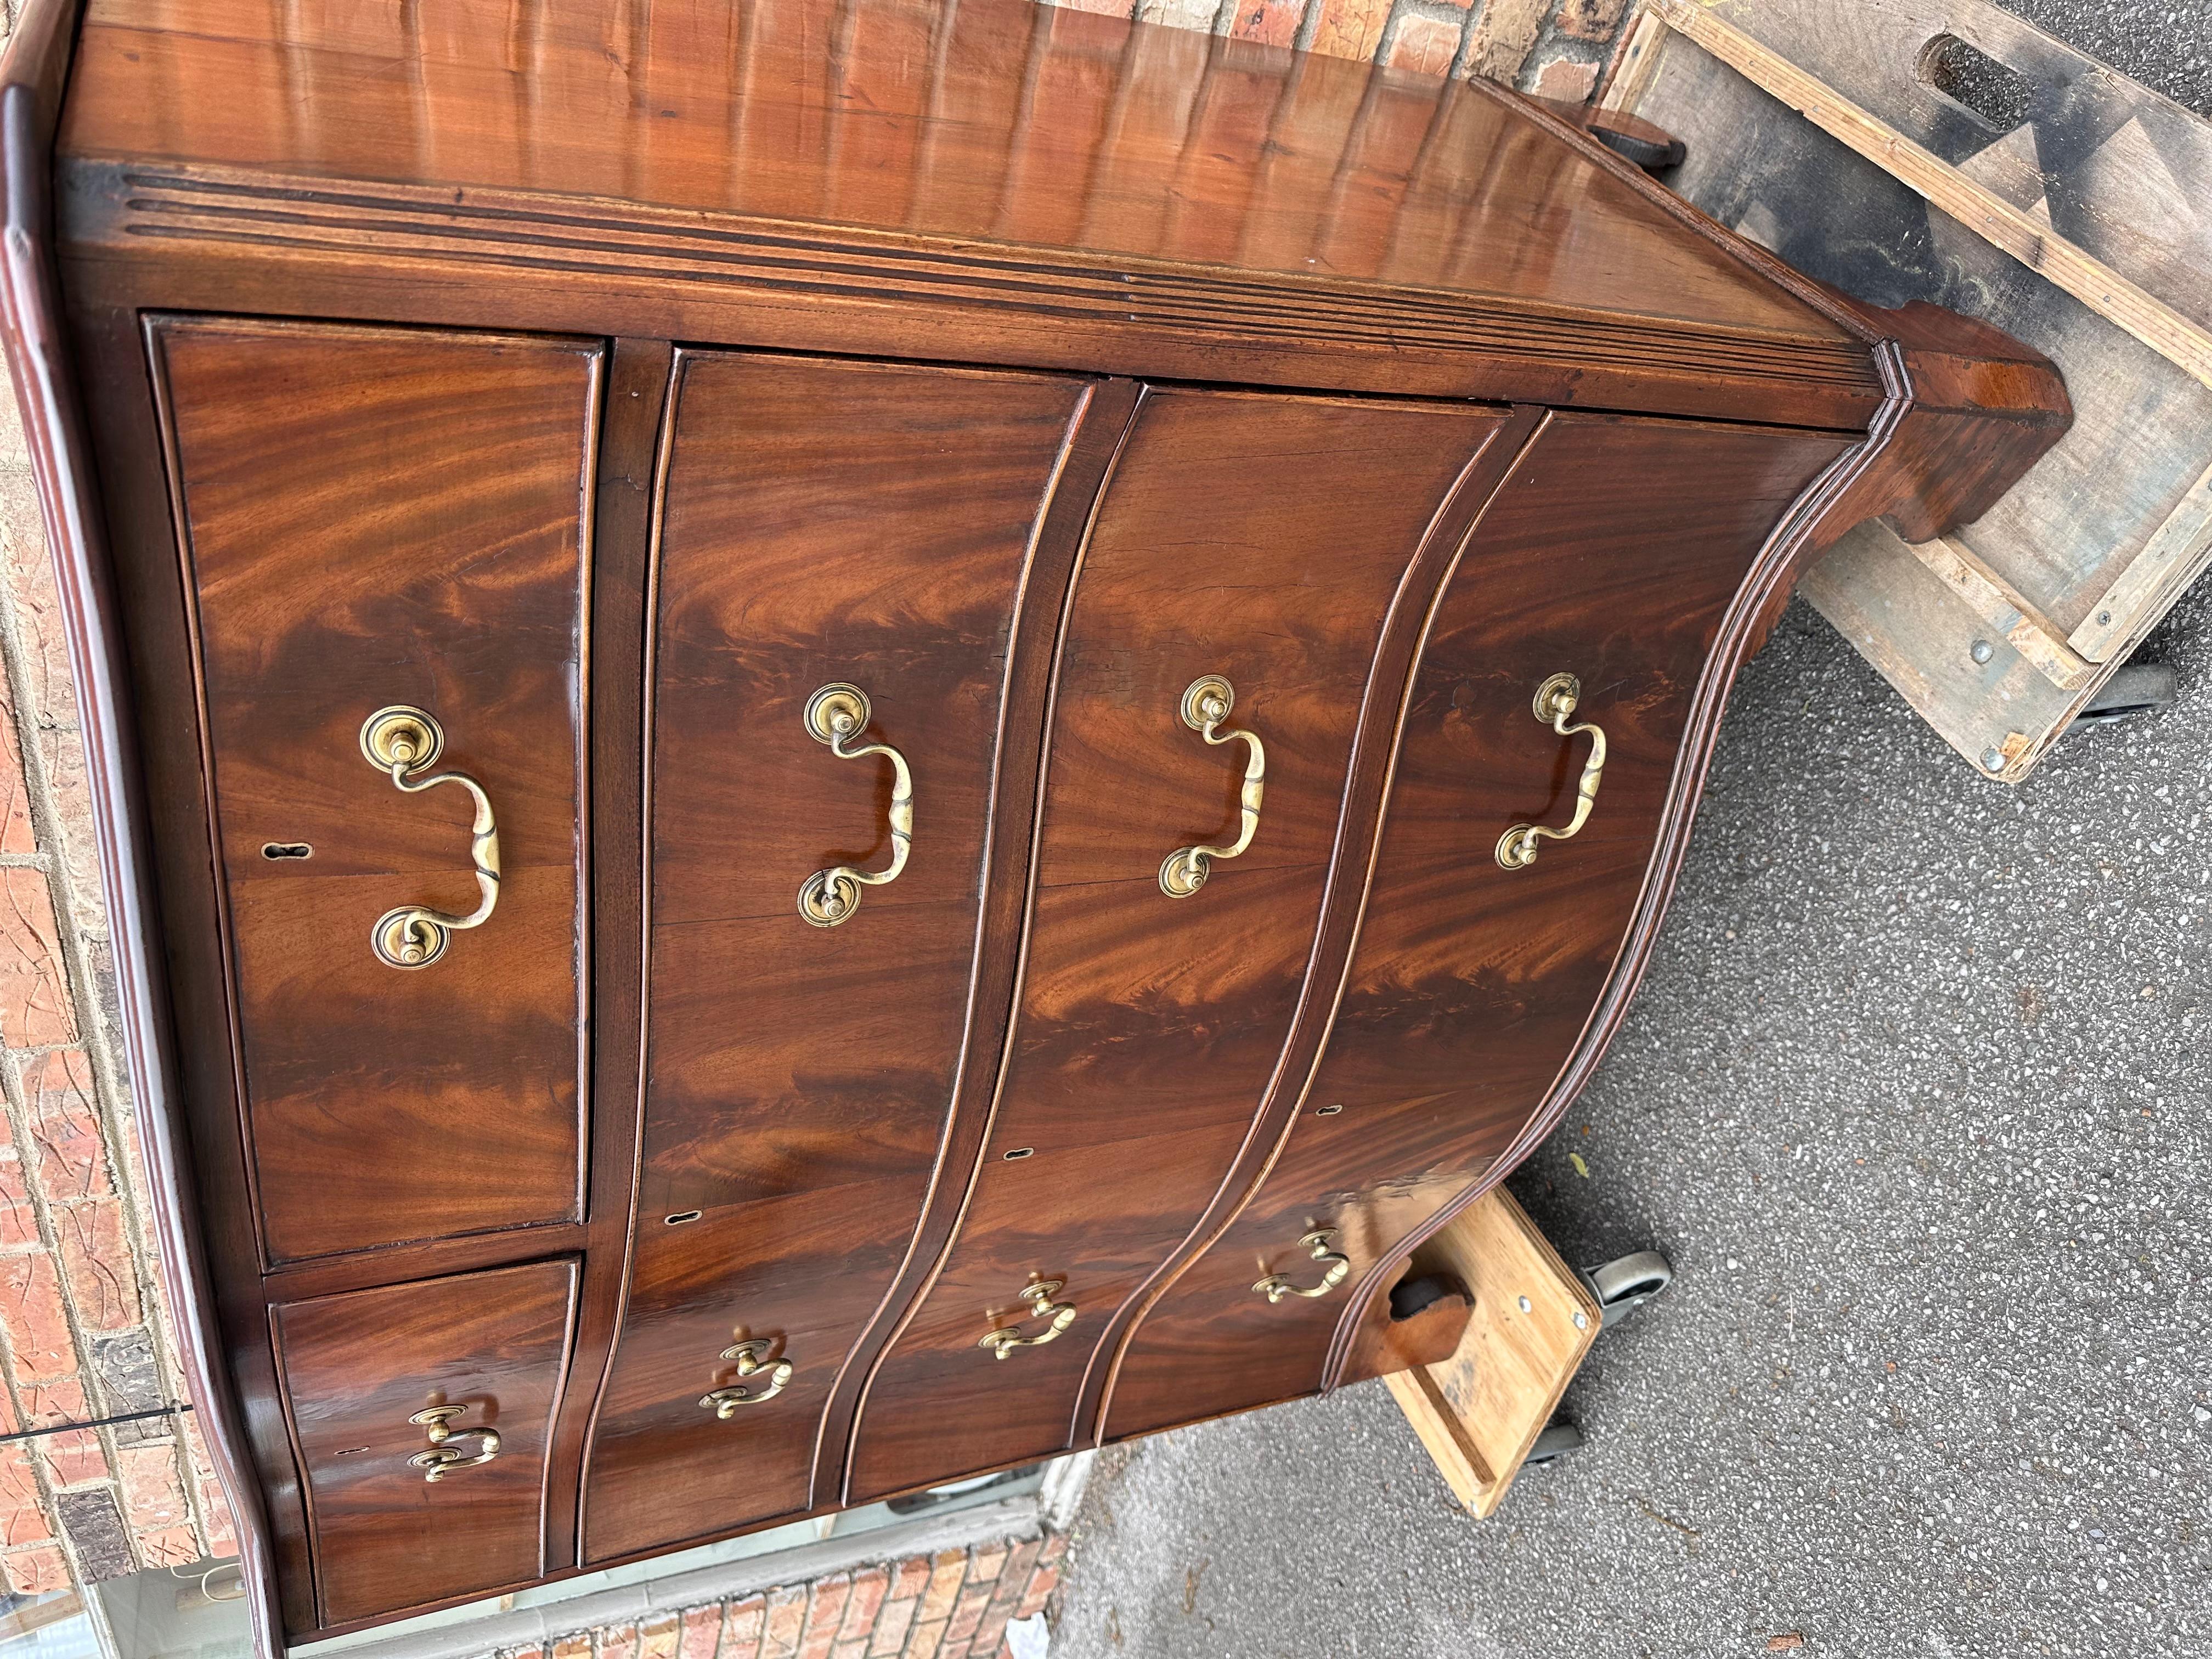 This is a beautiful mid 19th century English serpentine front chest. The wood Is a flamed mahogany, and it is flamed! In this business we don't see too many serpentine front chest mainly bowfront are flat front the opportunity to own one of these